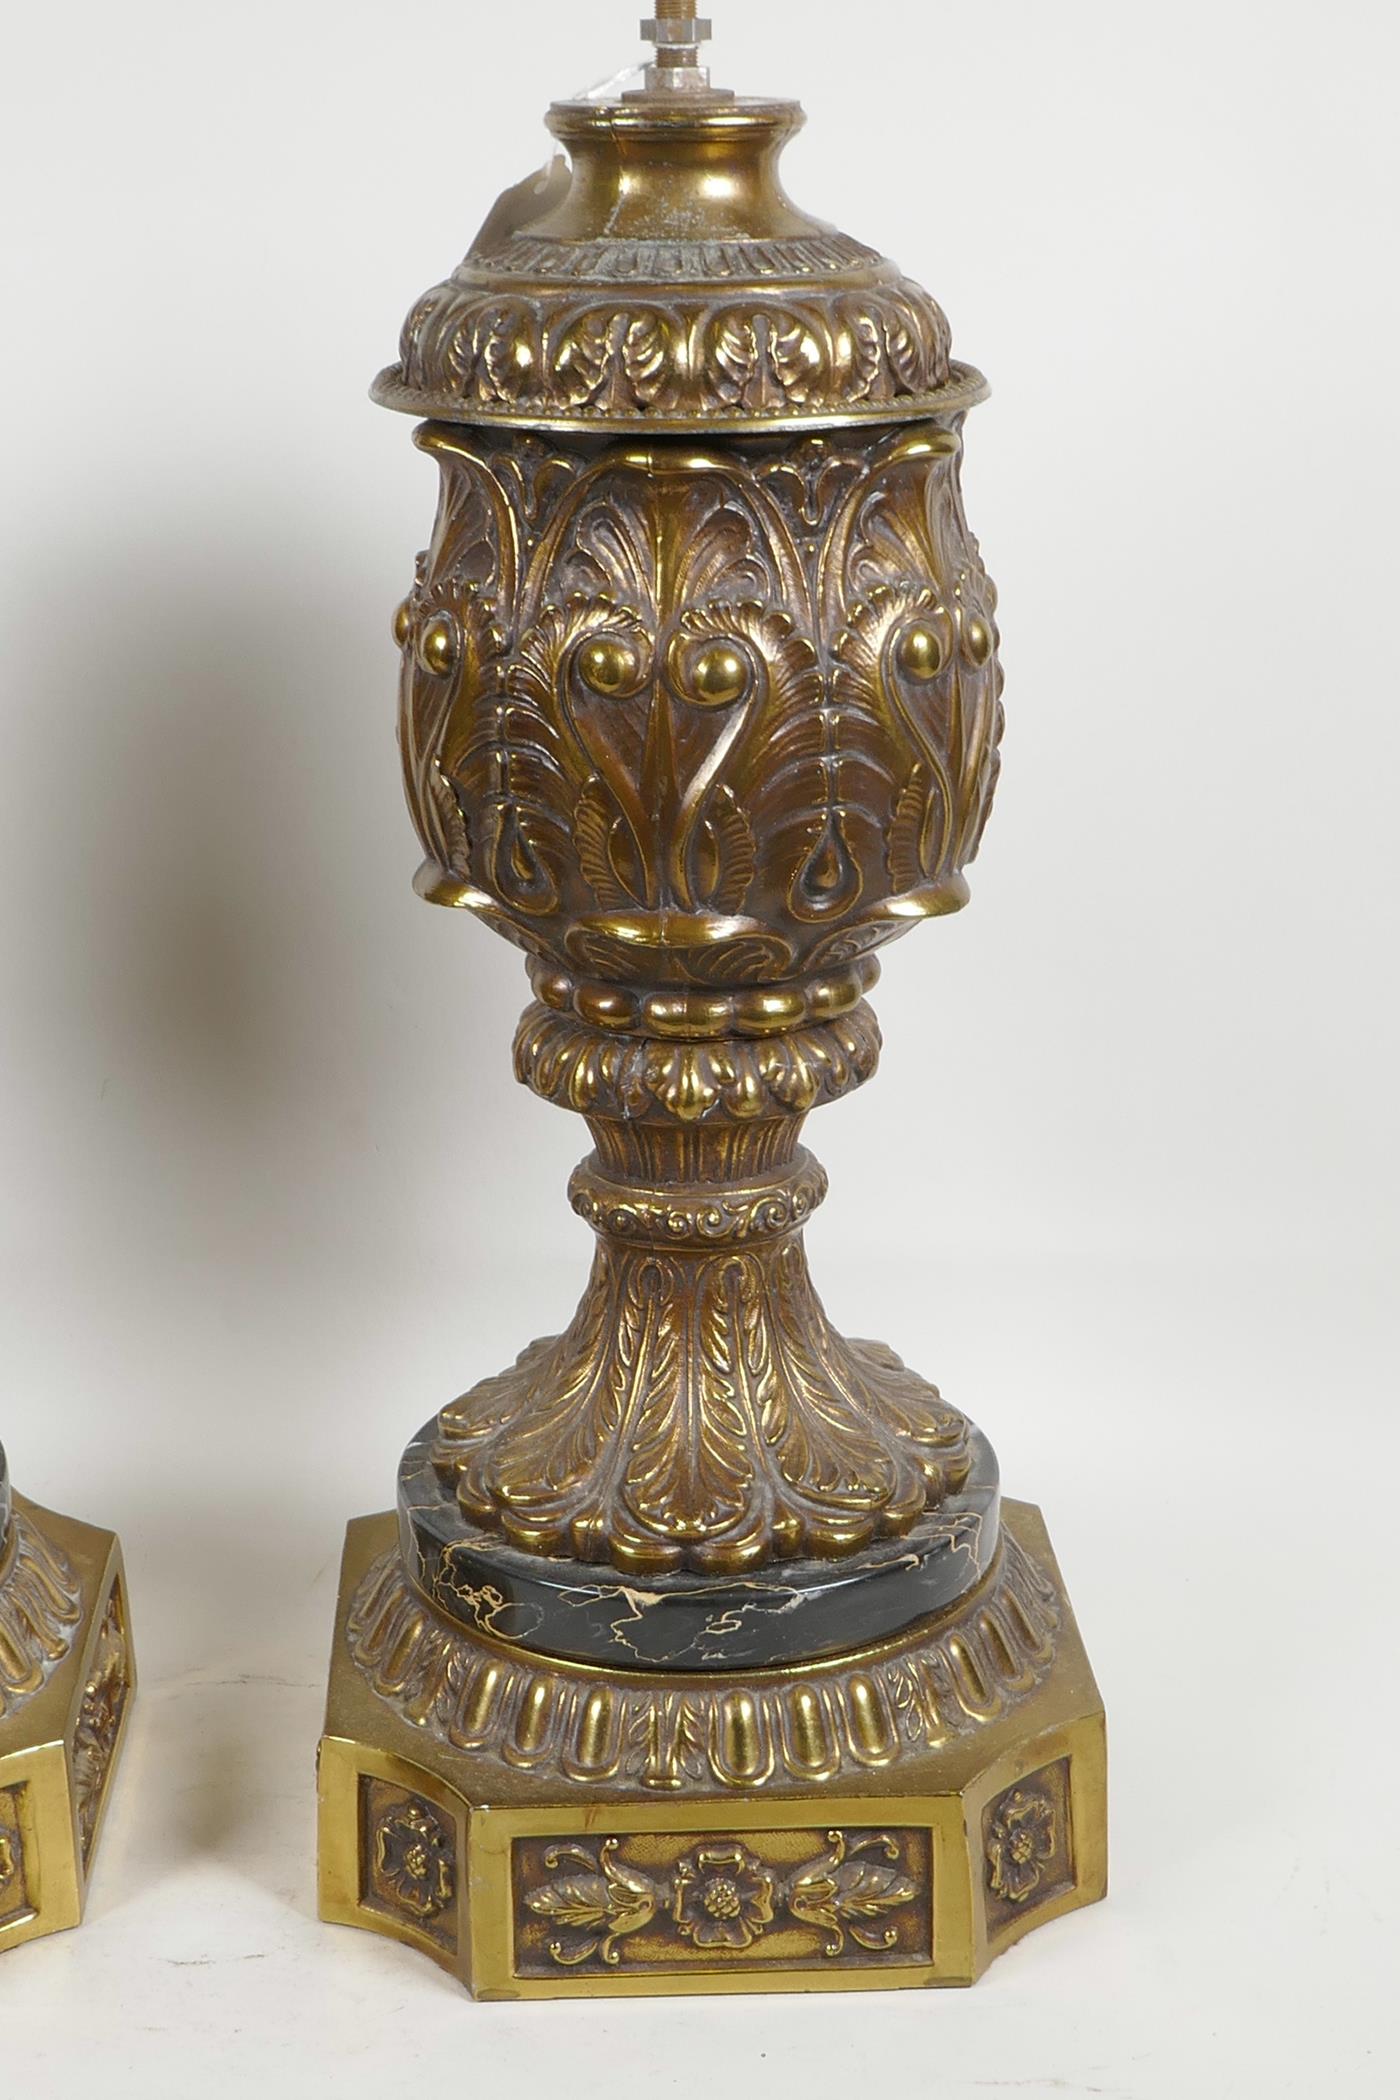 A pair of ornate urn shaped gilt spelter lamp bases, 17" high to top of urn - Image 3 of 4